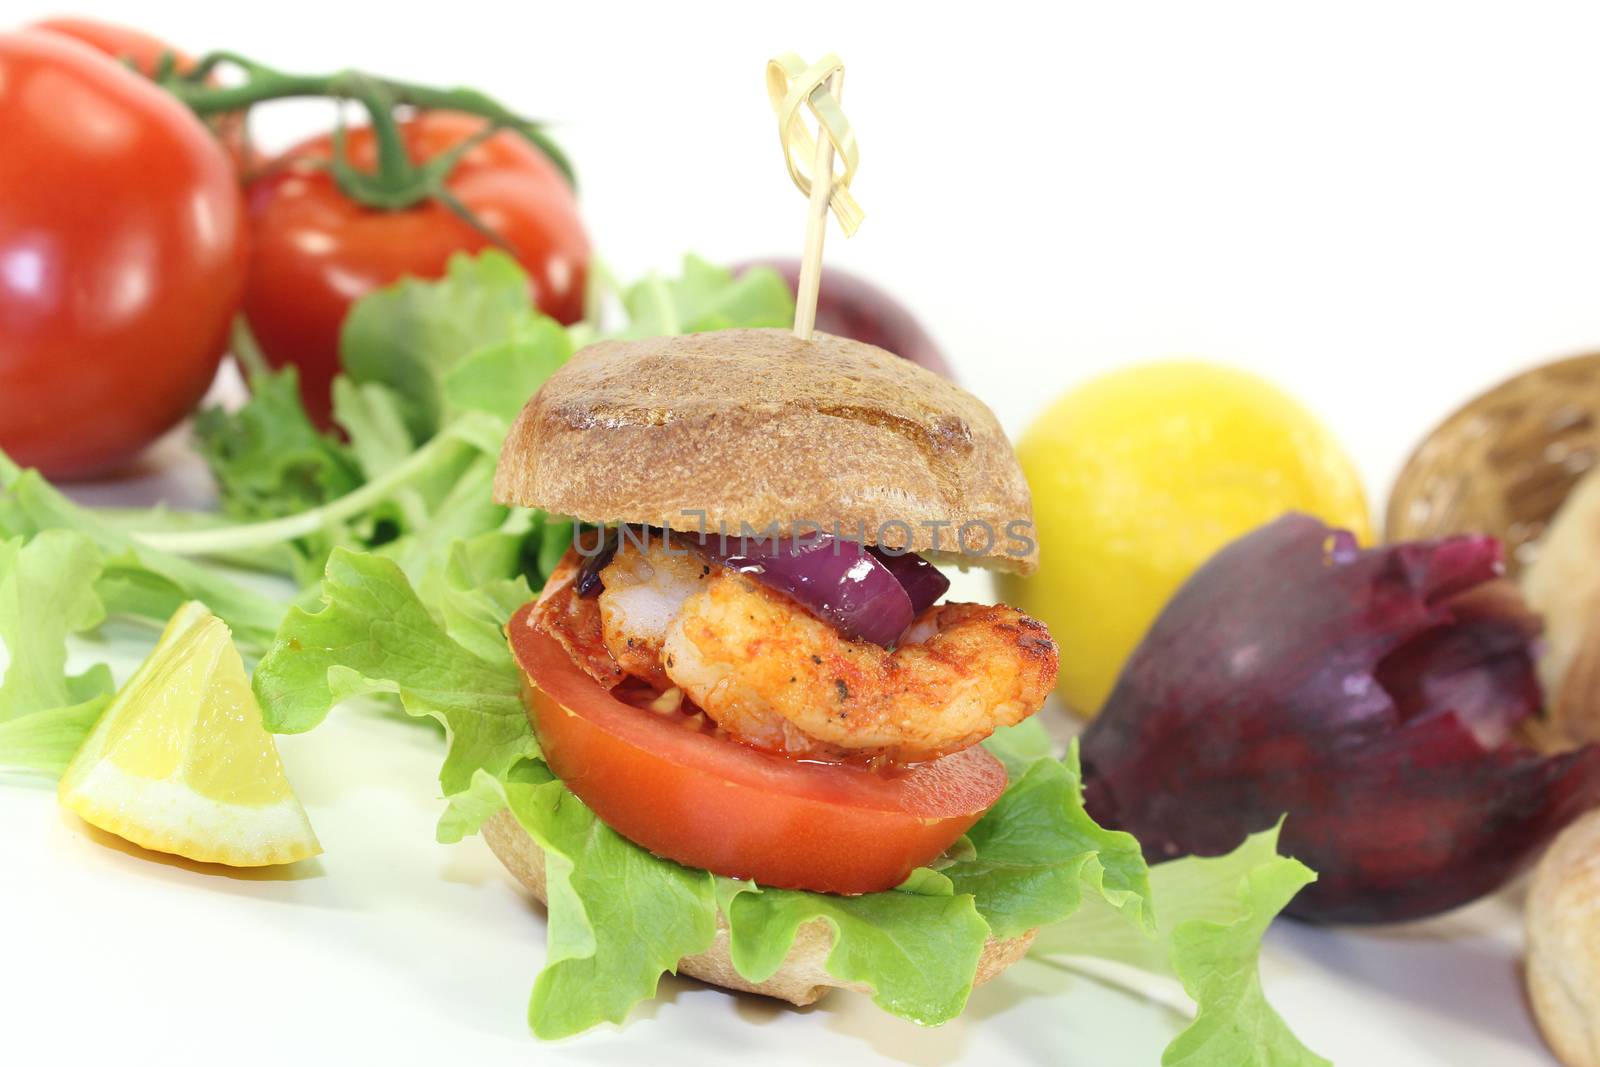 Shrimp burger with tomato, red onion and lettuce